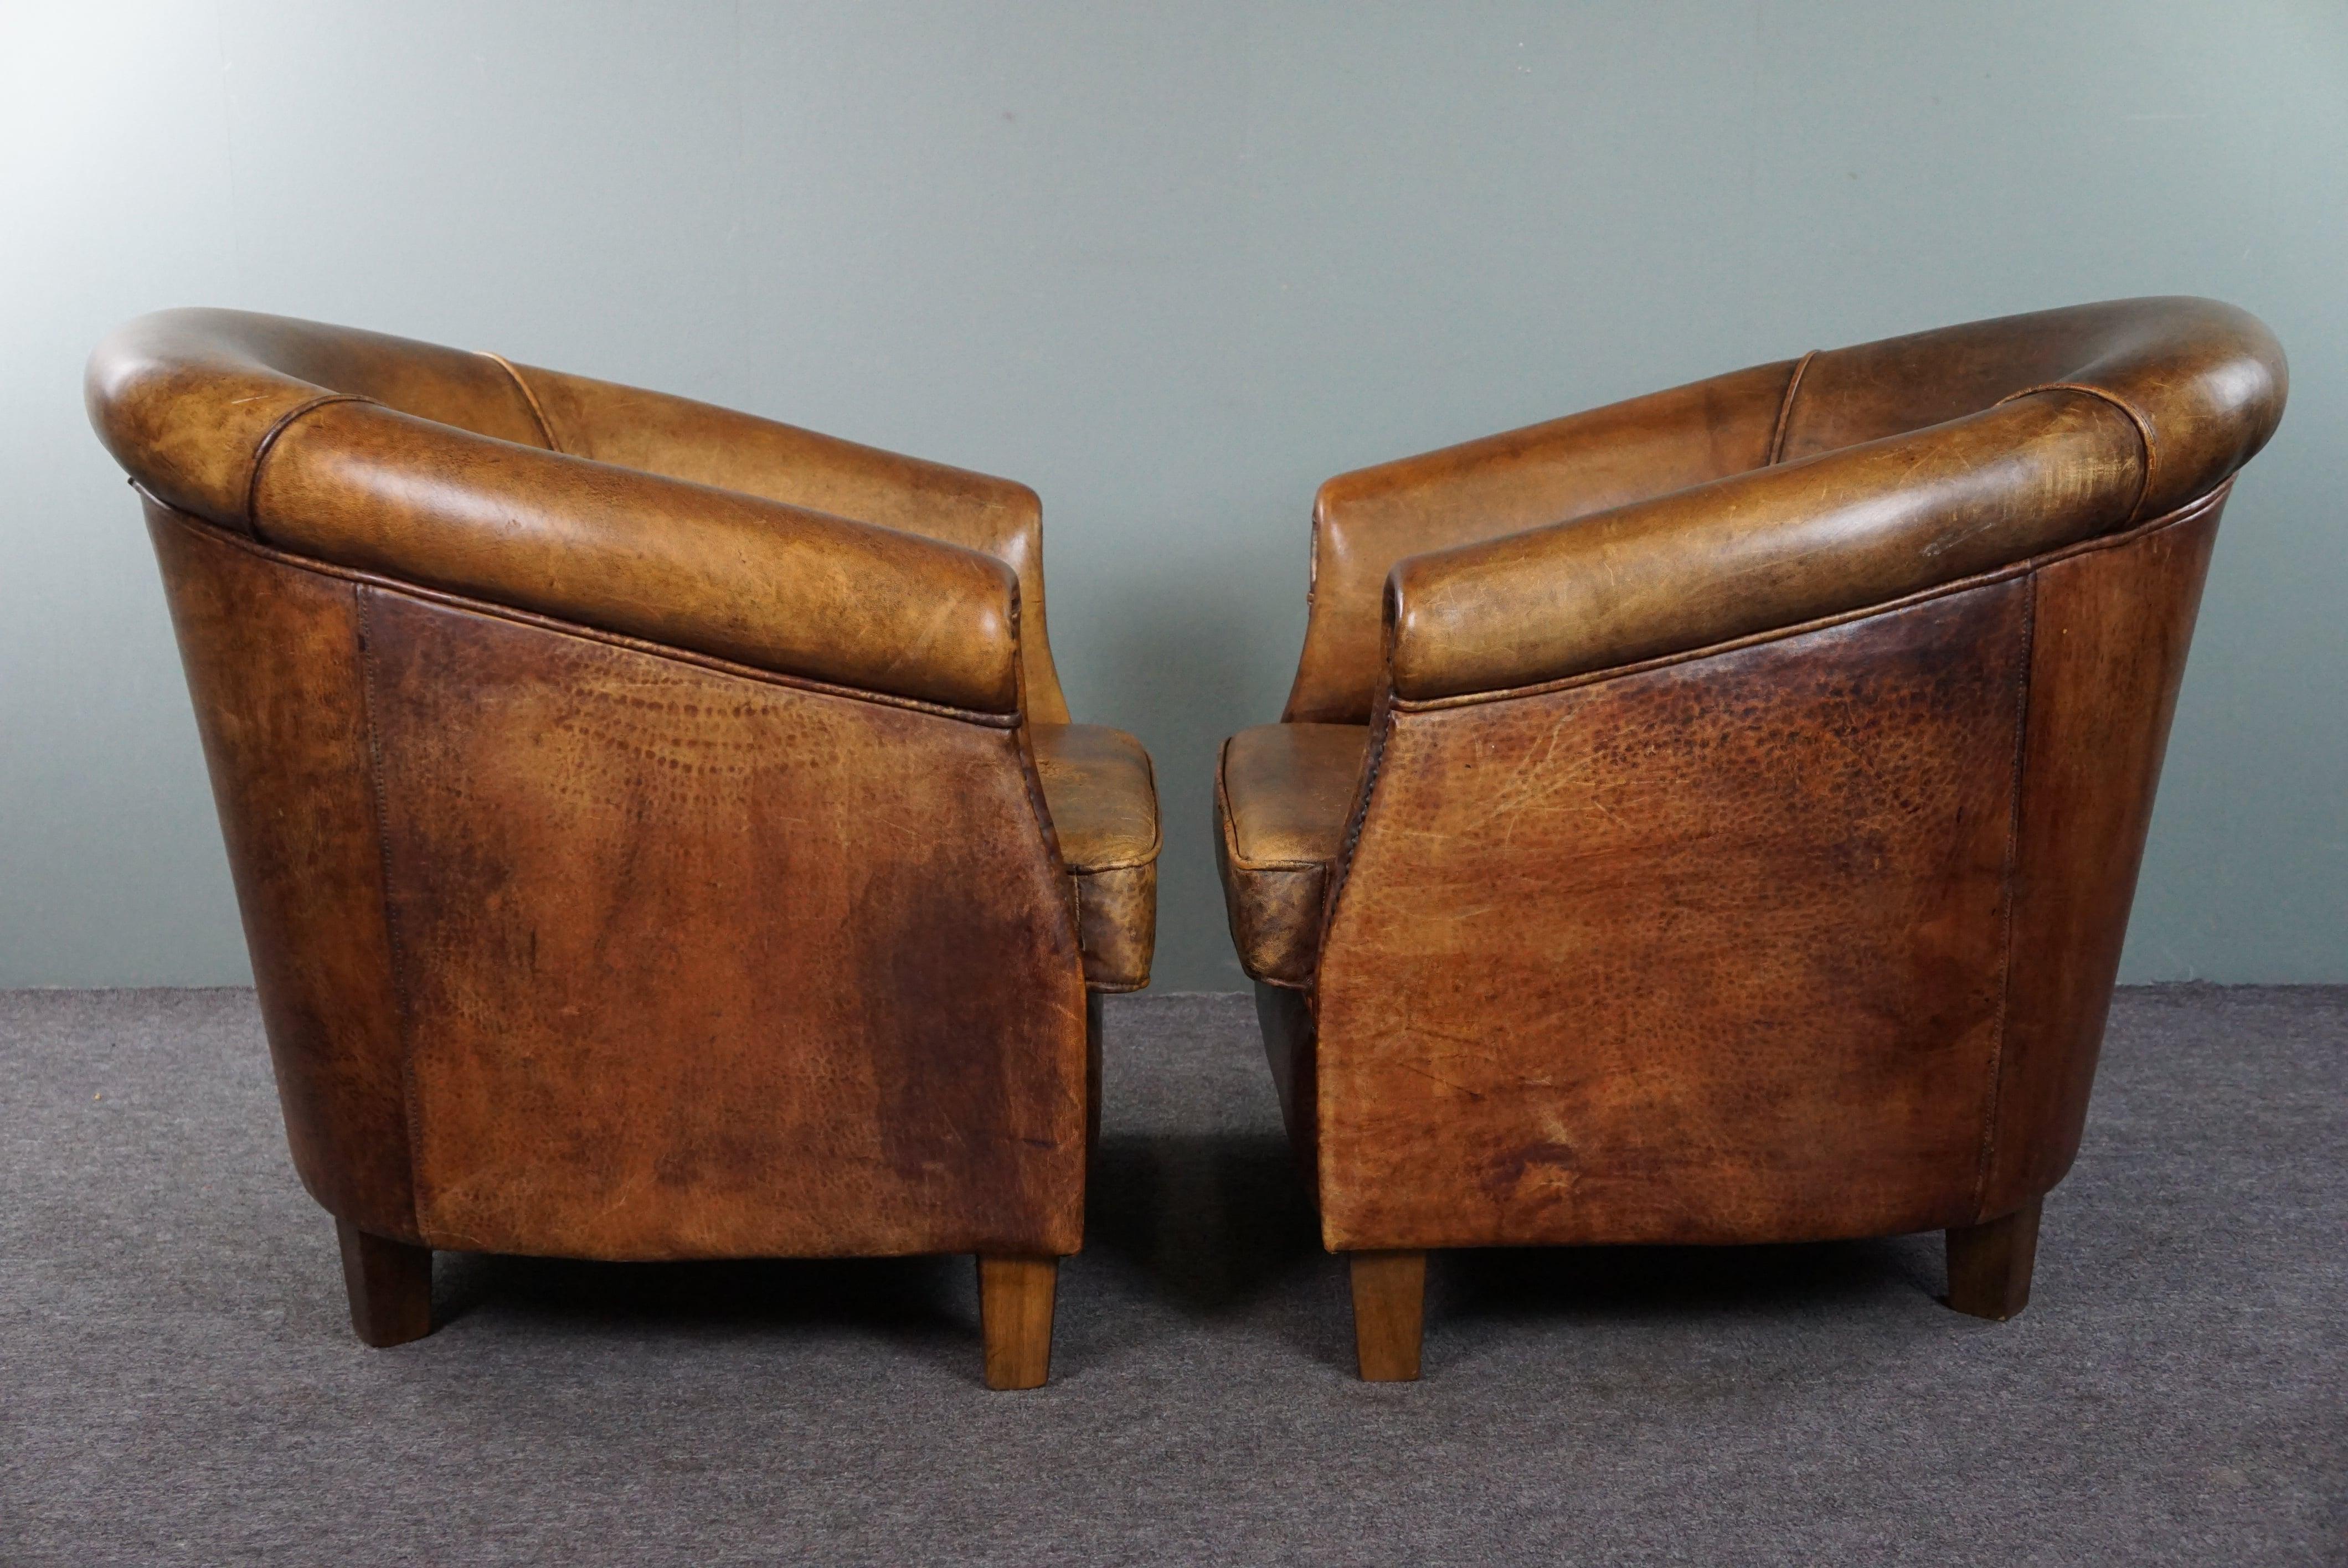 Dutch Set of two sturdy sheep leather club chairs, beautiful dark cognac color